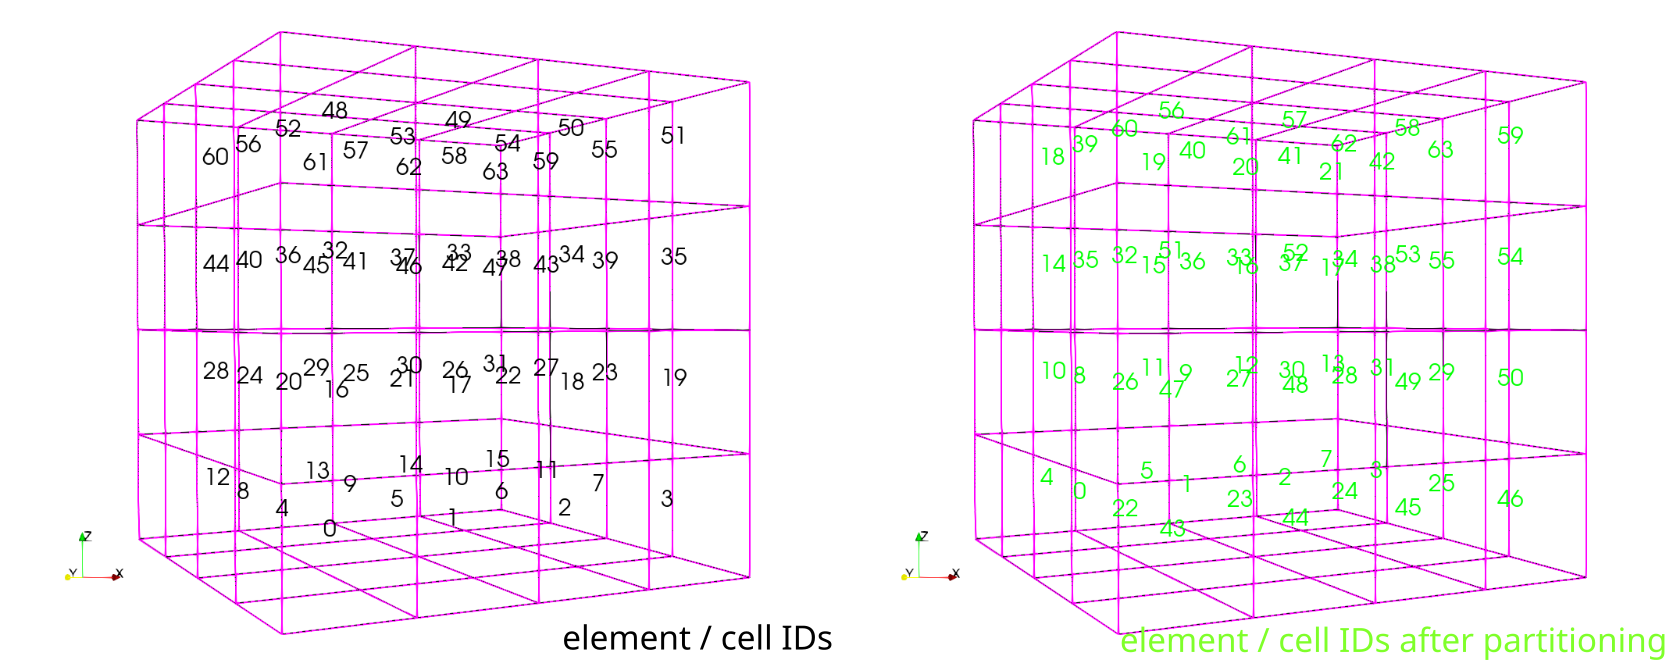 Element IDs in the bulk mesh for the serial simulation